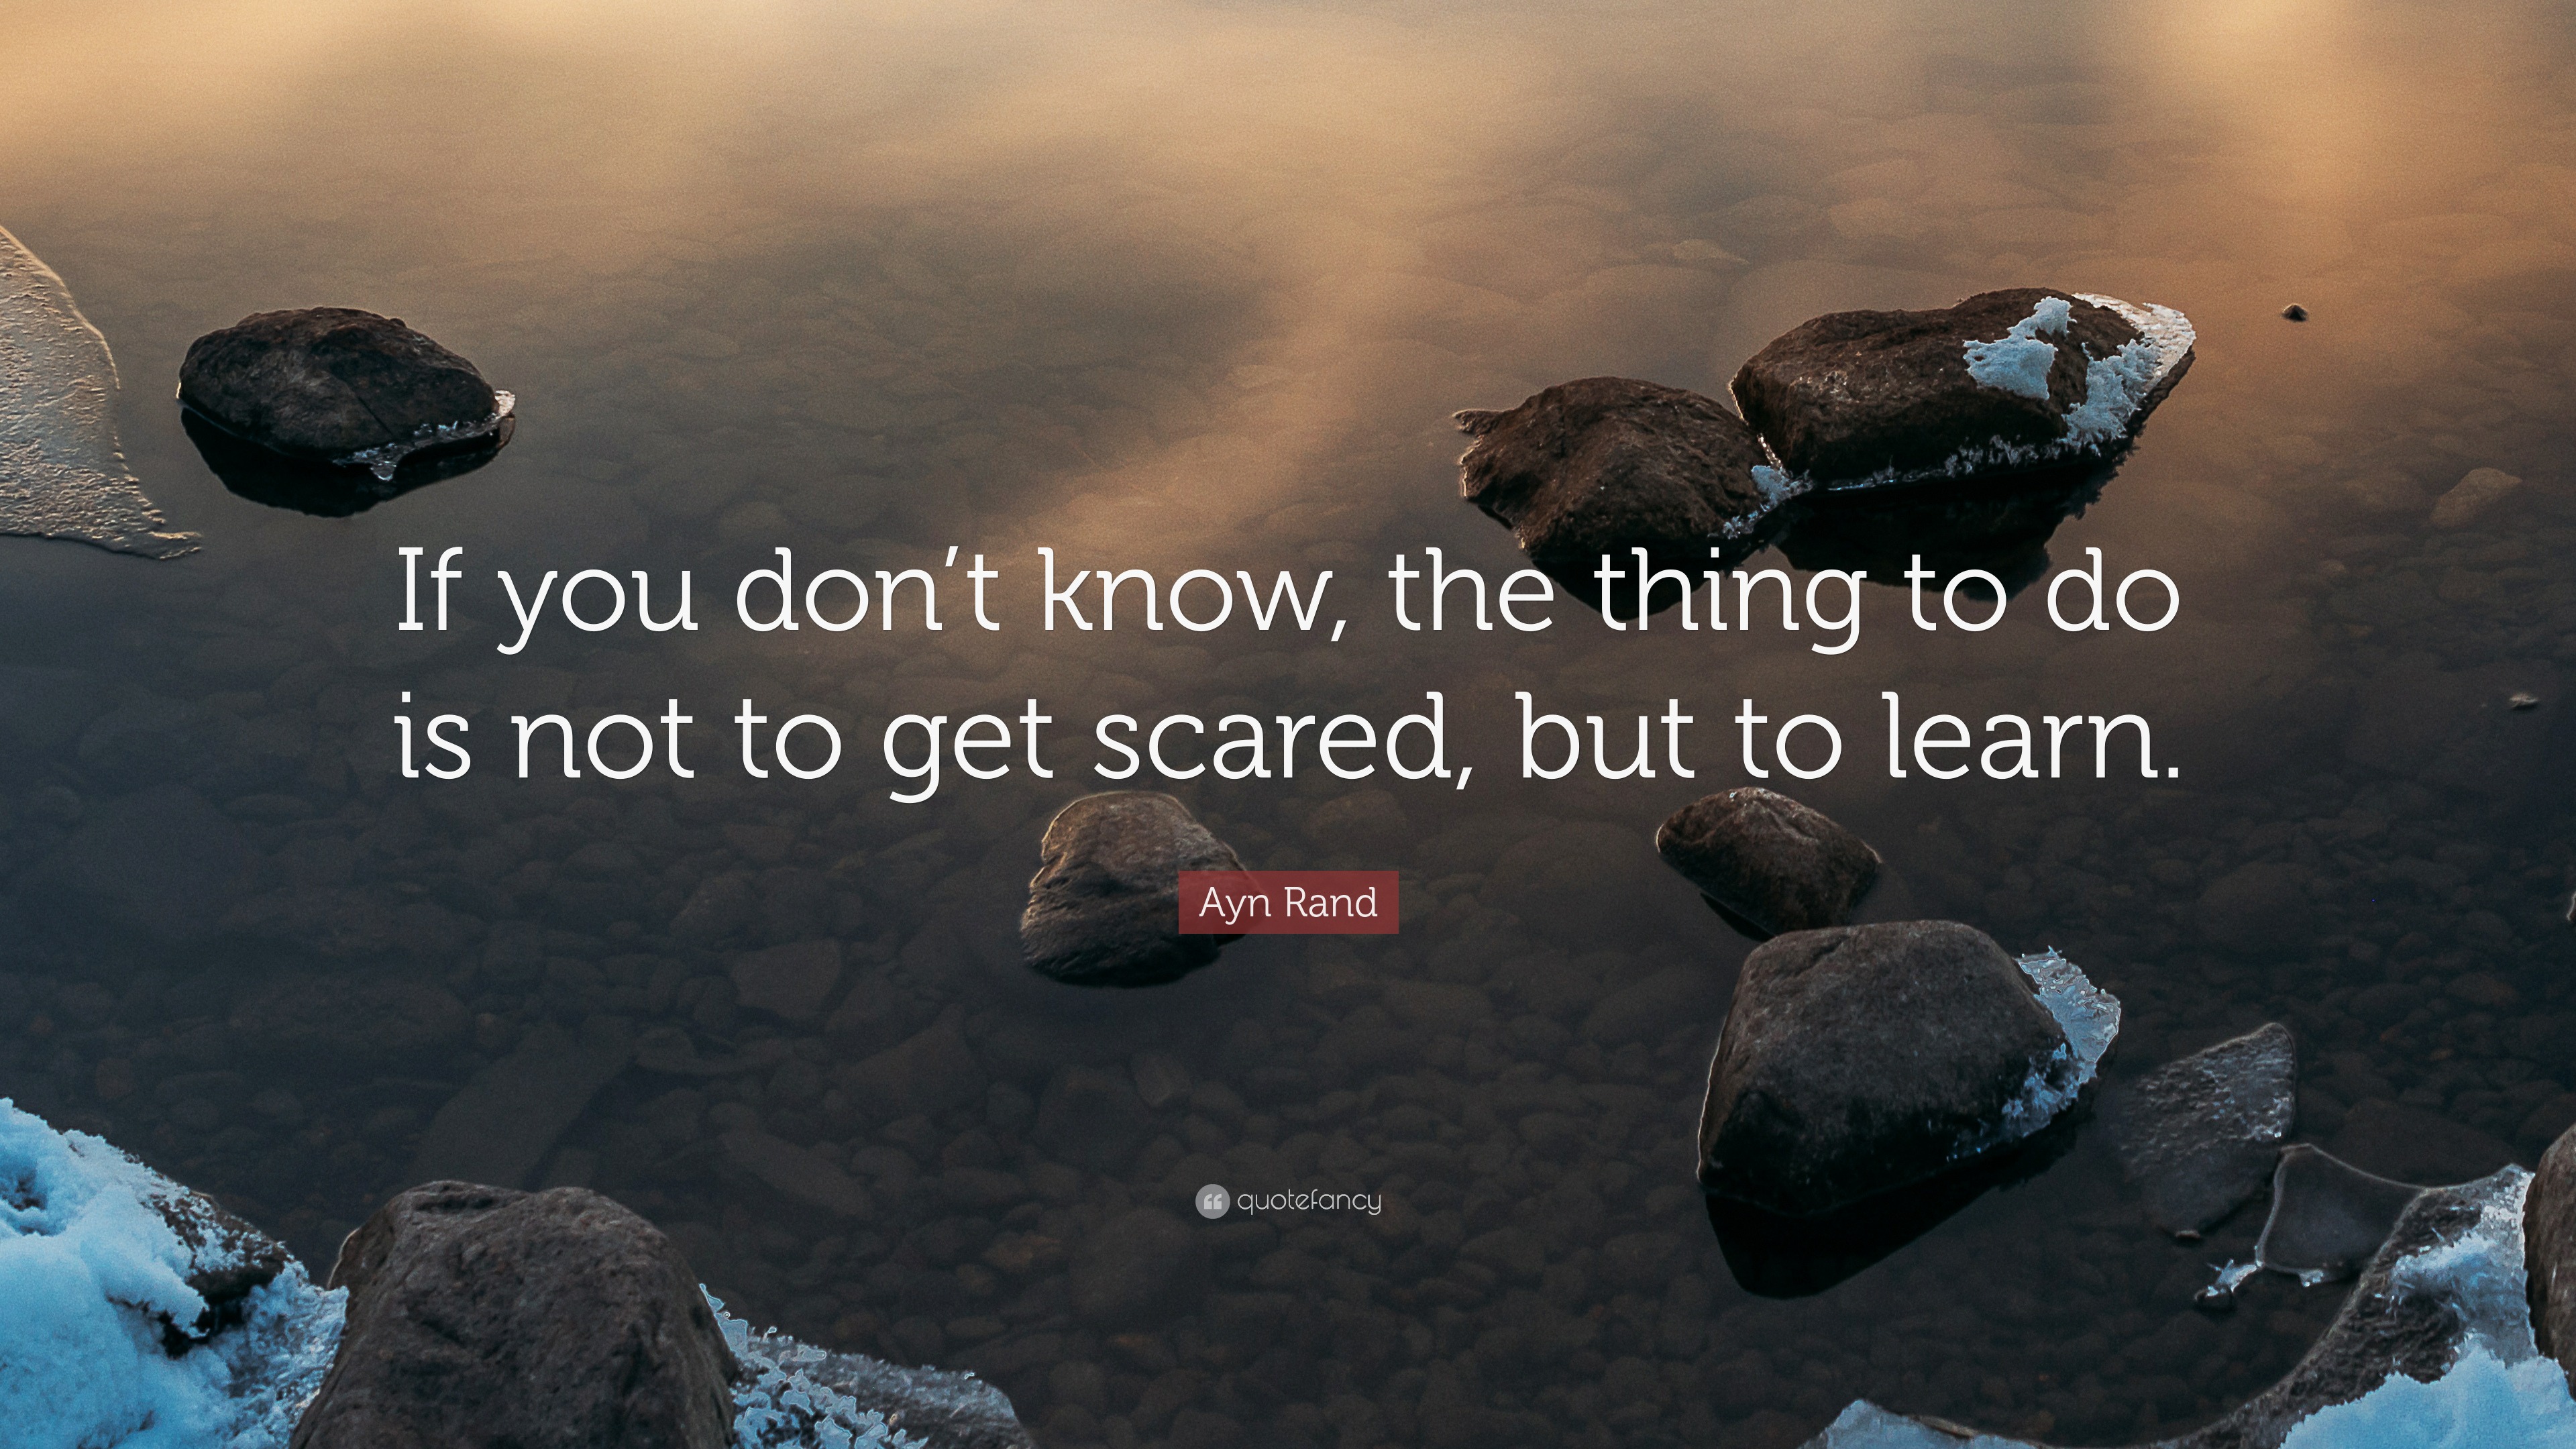 Image result for “If you don't know, the thing to do is not to get scared, but to learn.”